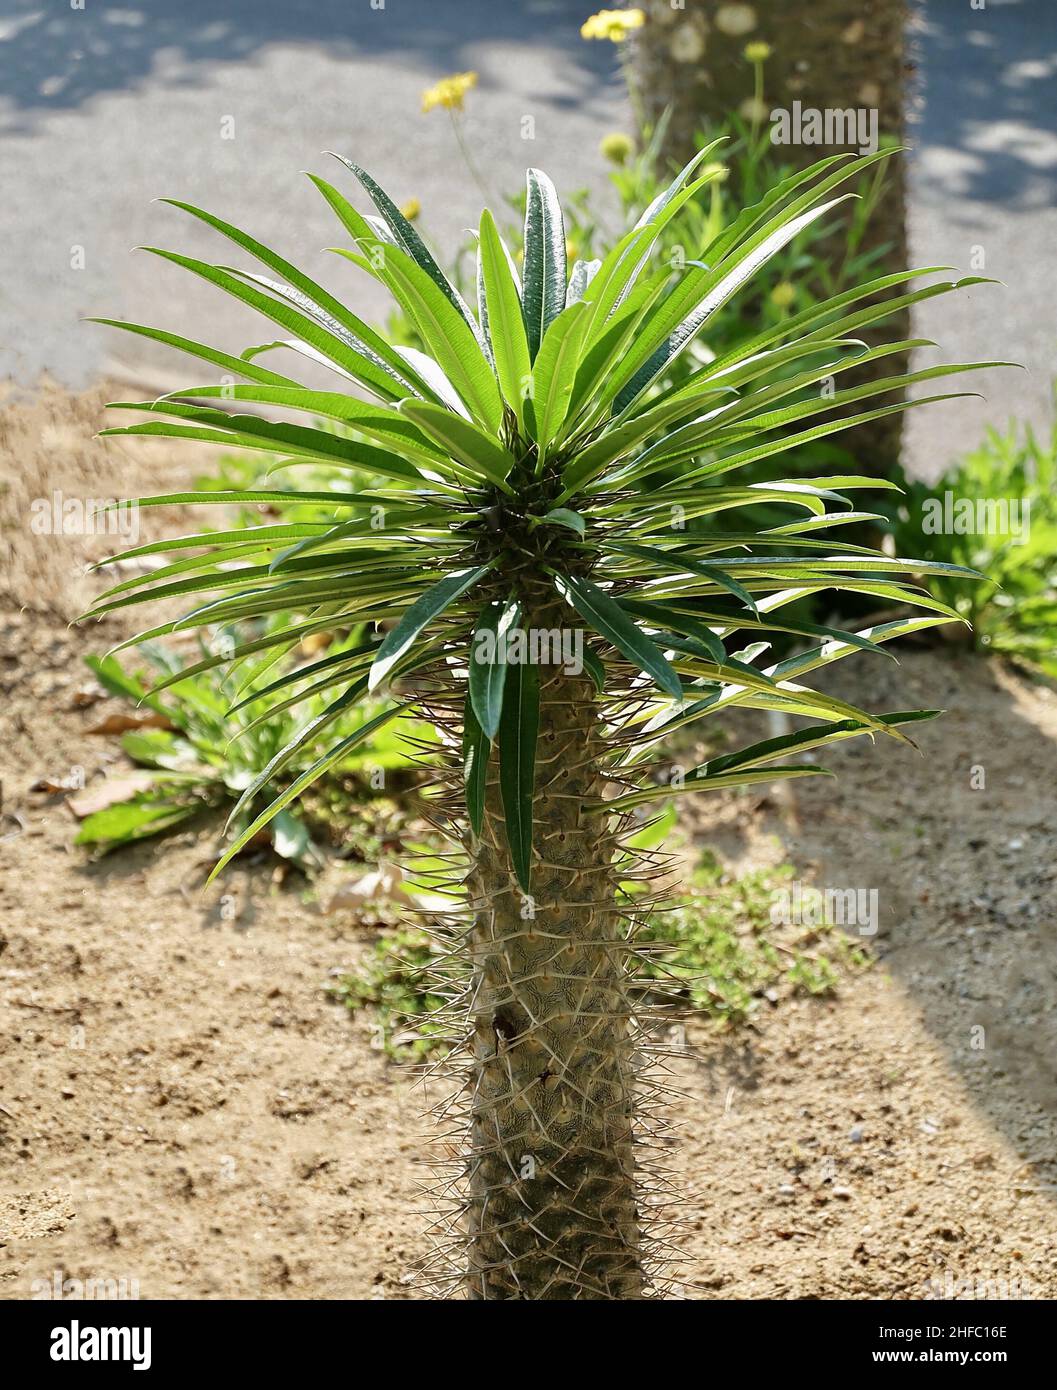 Garden and Plant, Pachypodium Lamerei Plants or Madagascar Palm Decoration in The Garden. A Succulent Plants with Sharp Thorns and Native to Madagasca Stock Photo